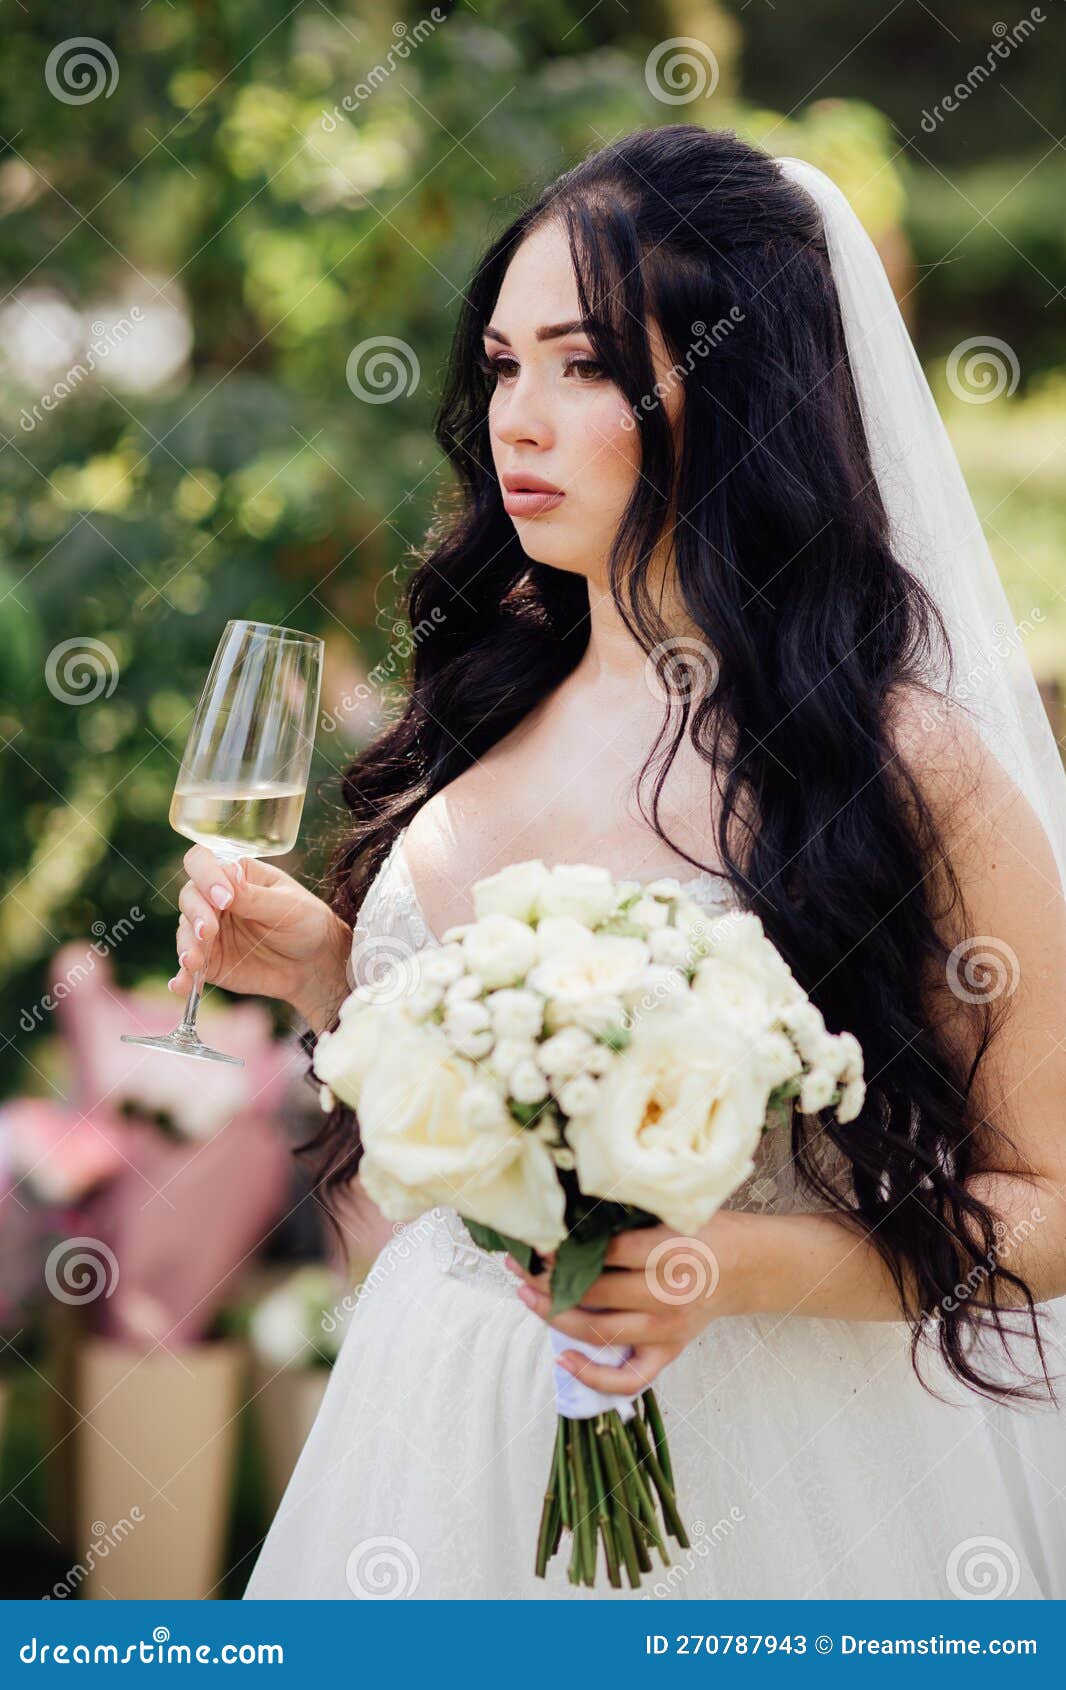 Beautiful, with a Large Bust, the Bride in a Wedding Dress Poses for the  Camera. Girl in White Dress Stock Image - Image of girl, elegant: 270787999